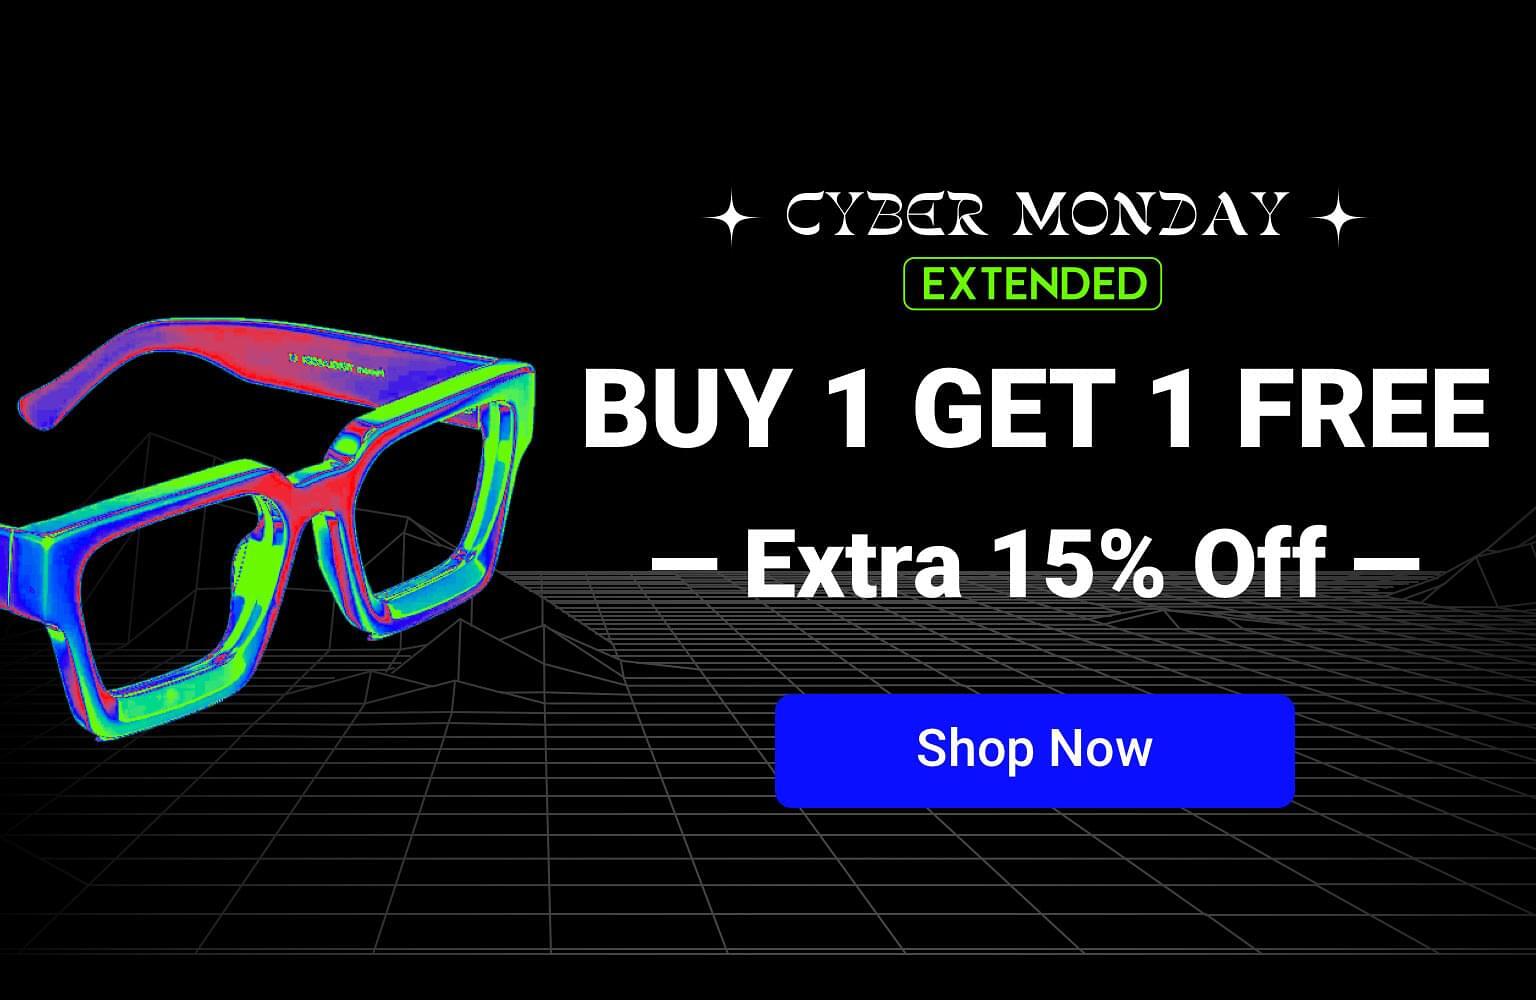 Extended Cyber Monday: BOGO Free + Extra 15% Off